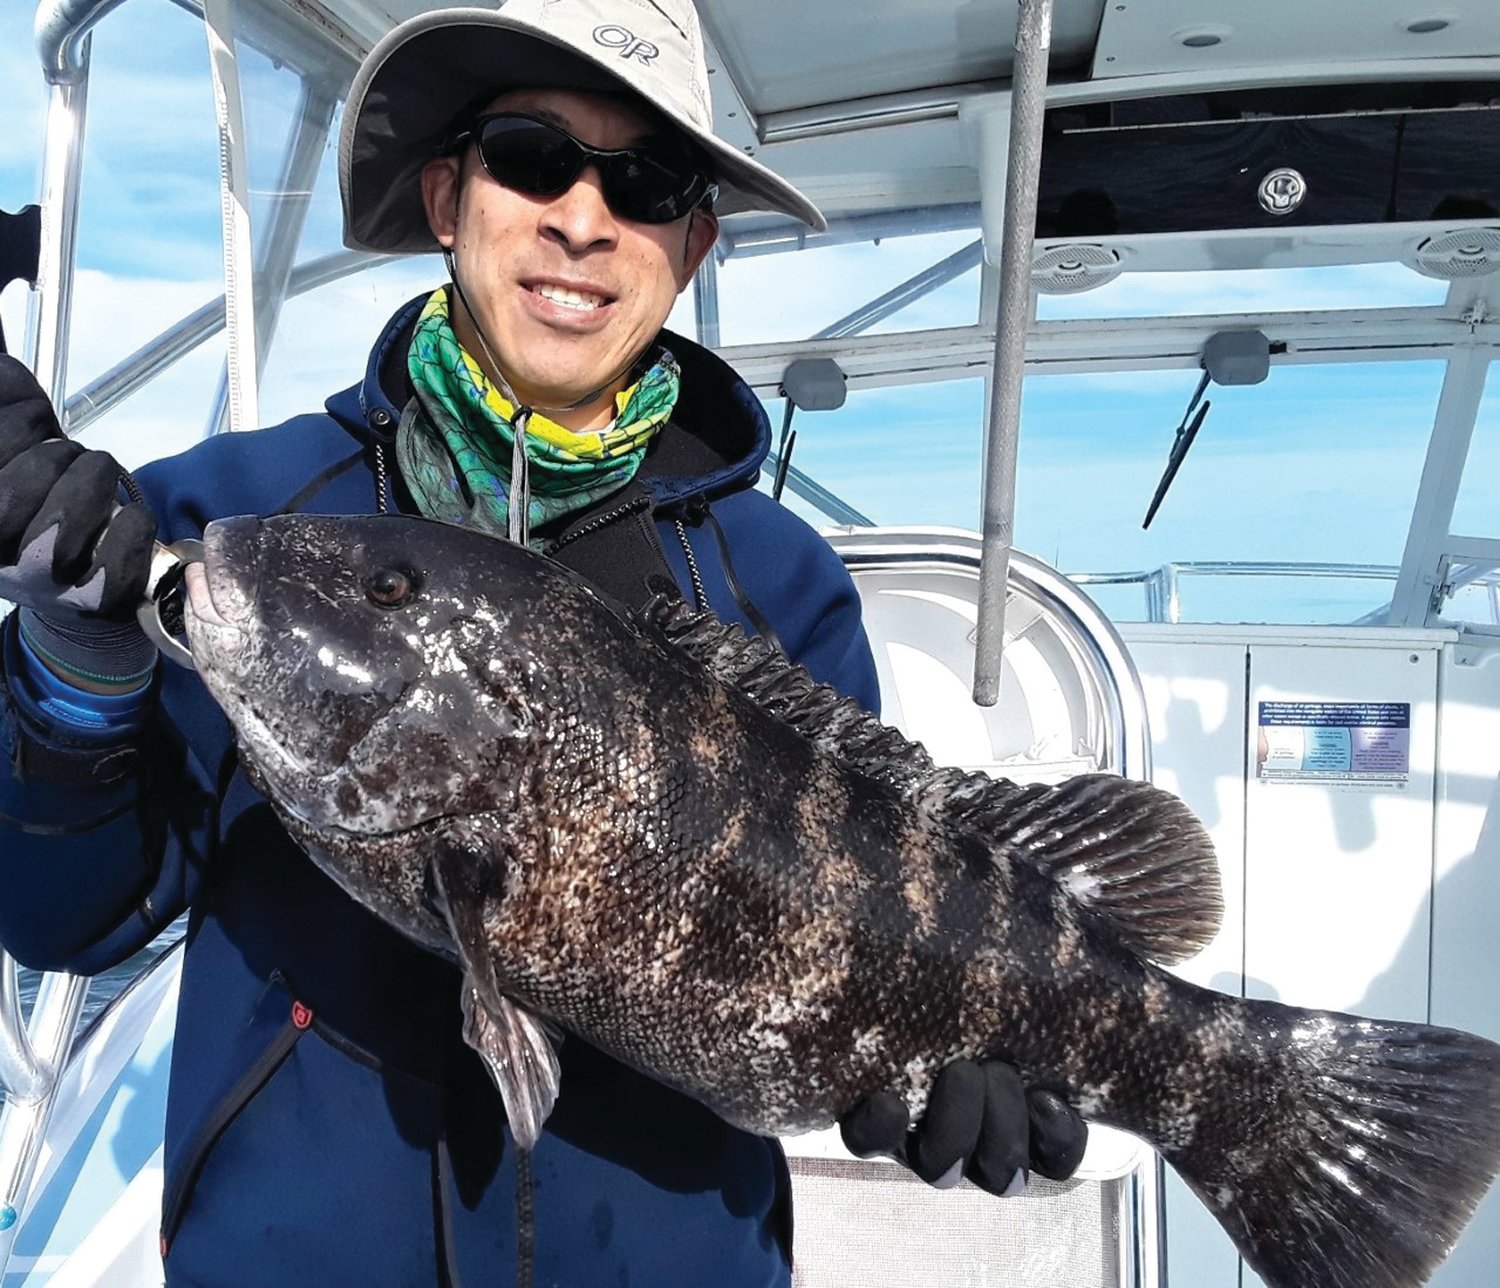 TOG TOURNAMENT: Anglers will aim to hook up with big tautog for the Tog Classic Tournament, October 9, like this one caught off Newport